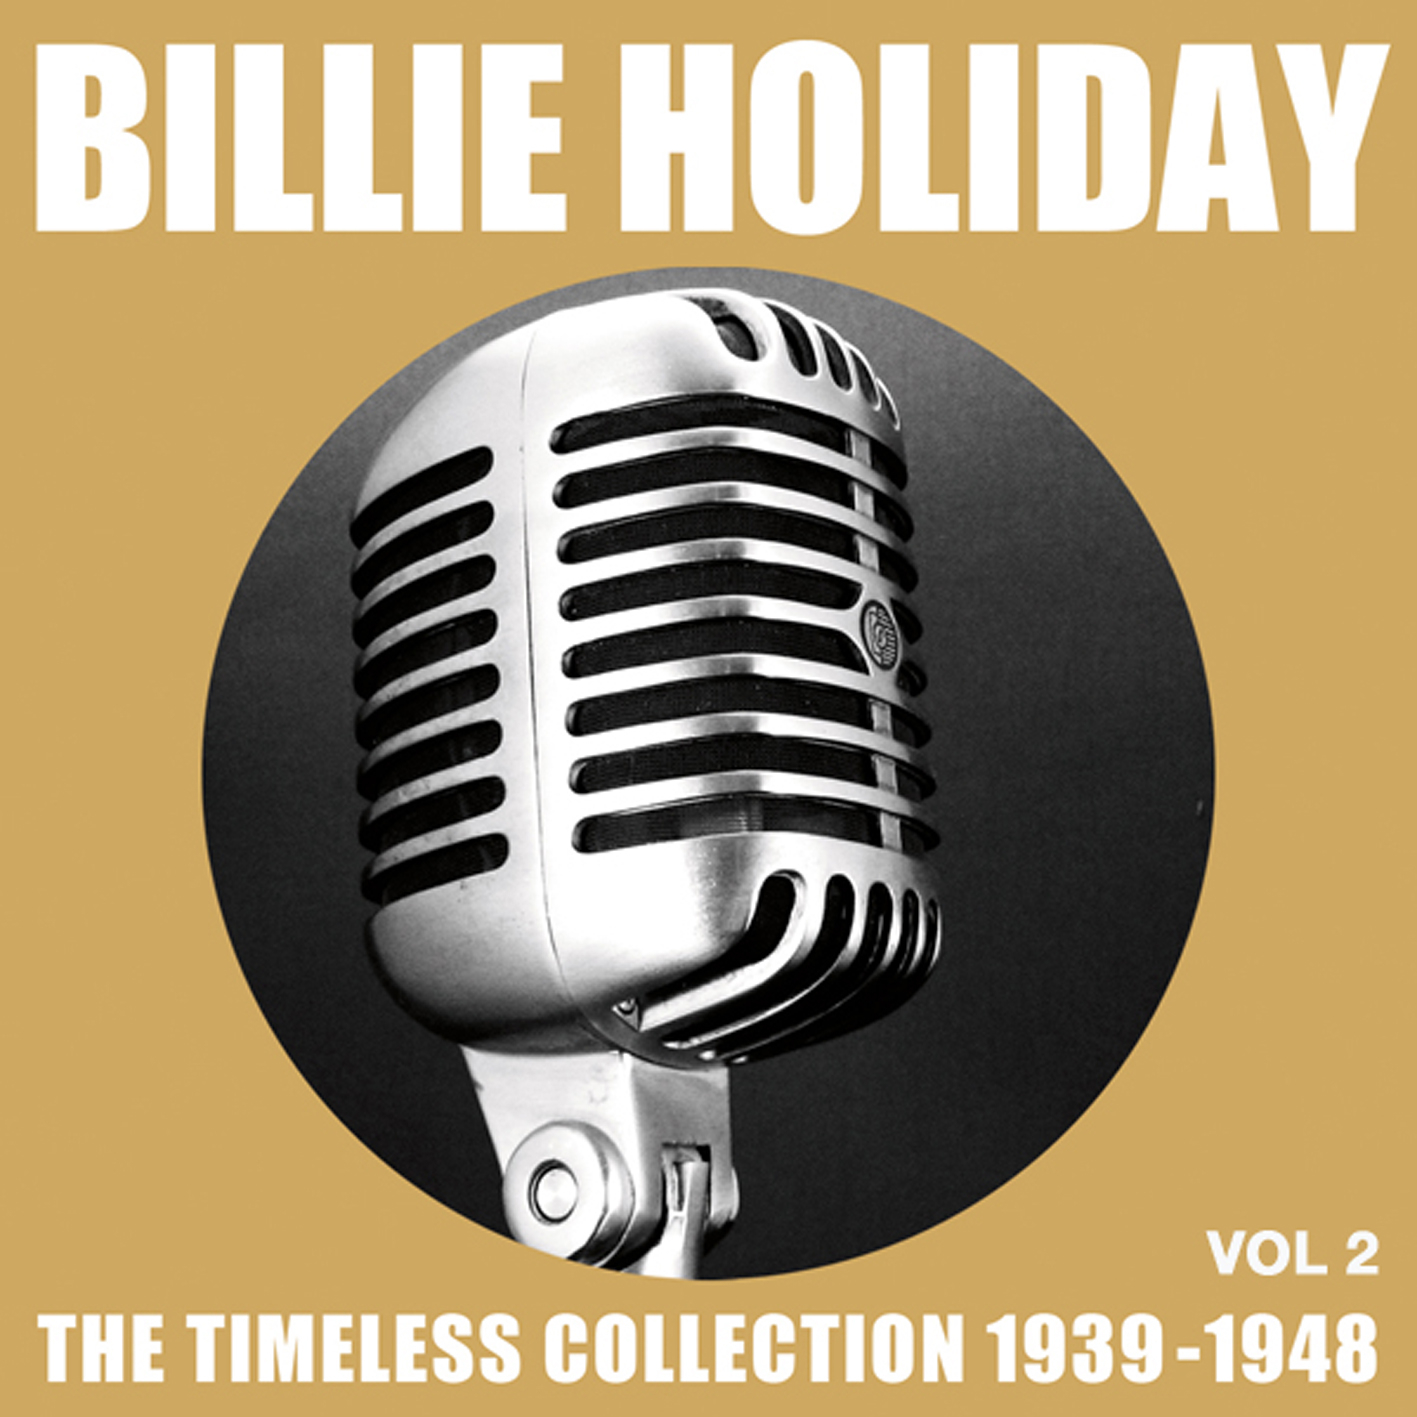 Billie Holiday The Timeless Collection 1939 - 1948 Vol.2